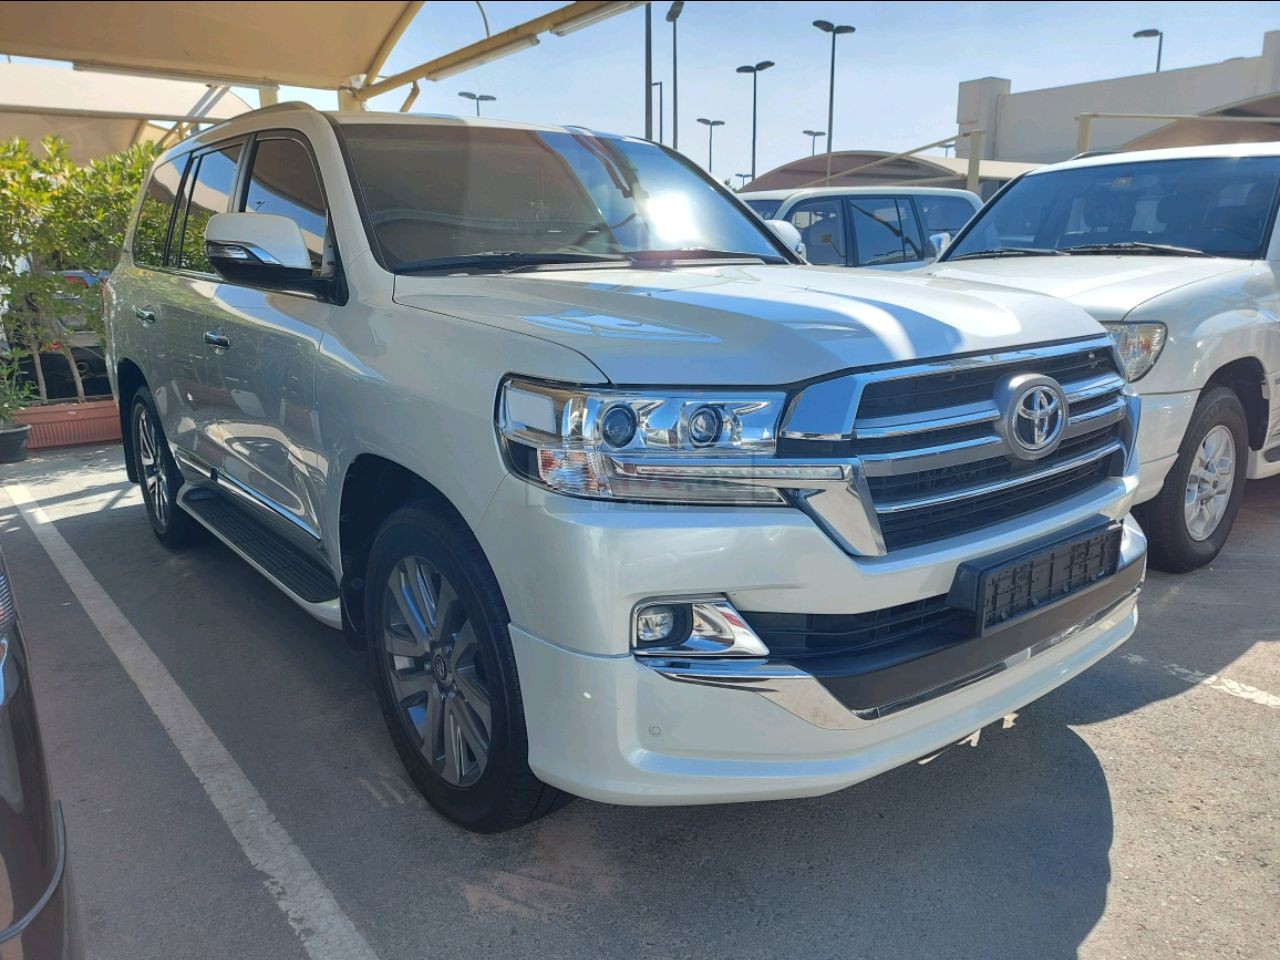 Toyota Land Cruiser 2018 AED 215,000, Good condition, Full Option, Sunroof, Navigation System, Fog Lights, Negotiable